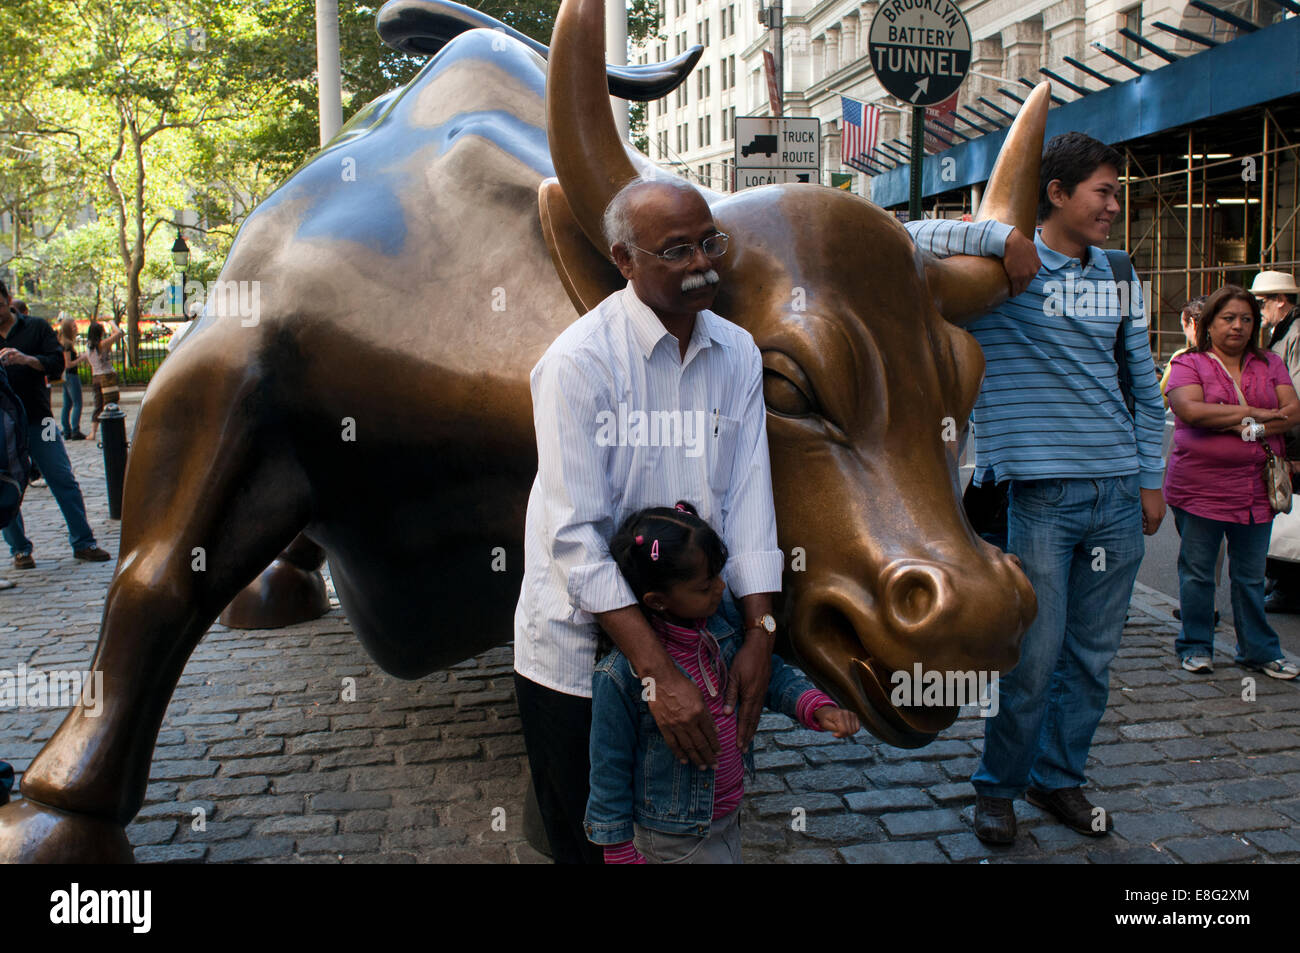 'CHARGING BULL SCULPTURE' NEAR WALL STREET IN THE DOWNTOWN FINANCIAL DISTRICT OF MANHATTAN NEW YORK CITY USA. Wall Street Bull. Stock Photo